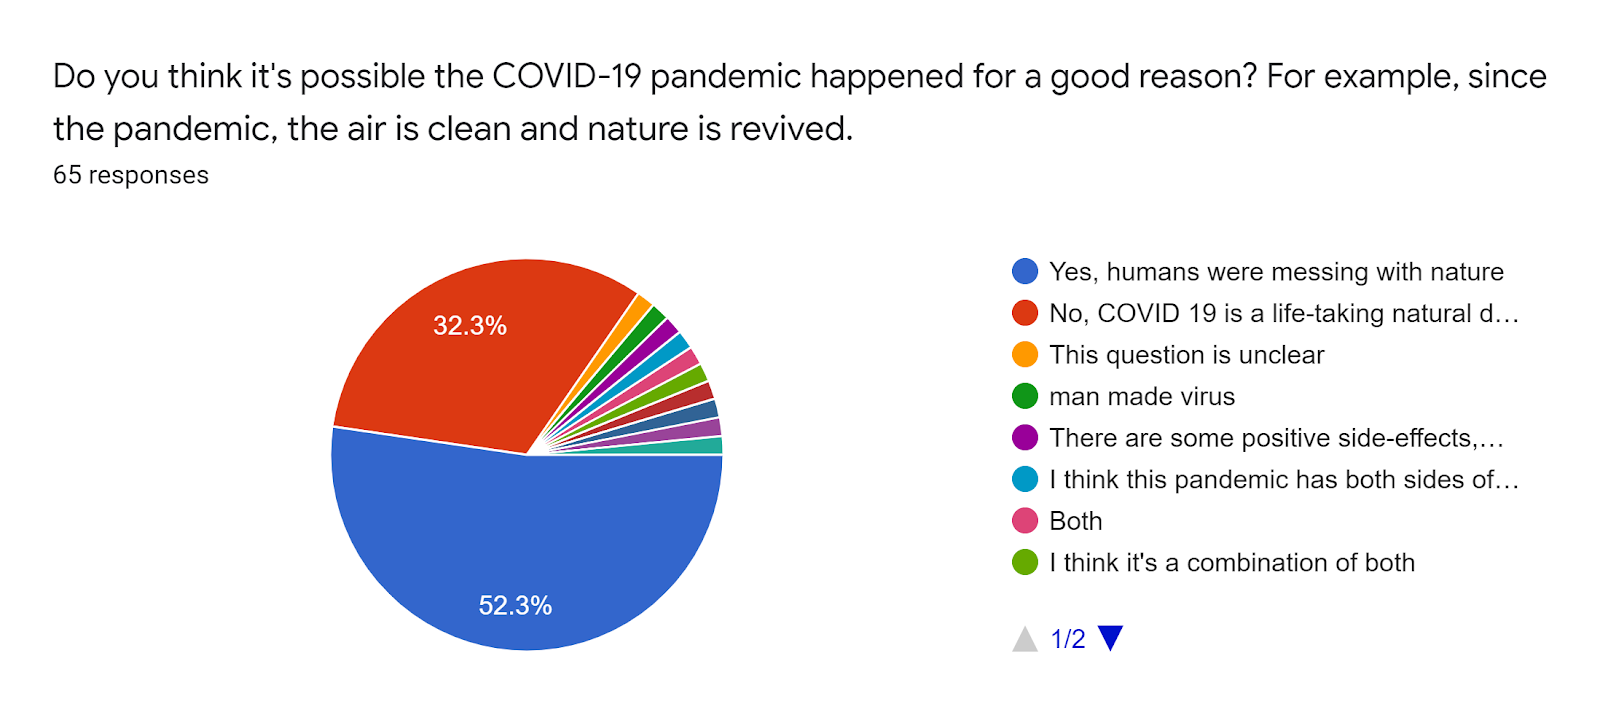 Forms response chart. Question title: Do you think it's possible the COVID-19 pandemic happened for a good reason? For example, since the pandemic, the air is clean and nature is revived. . Number of responses: 65 responses.